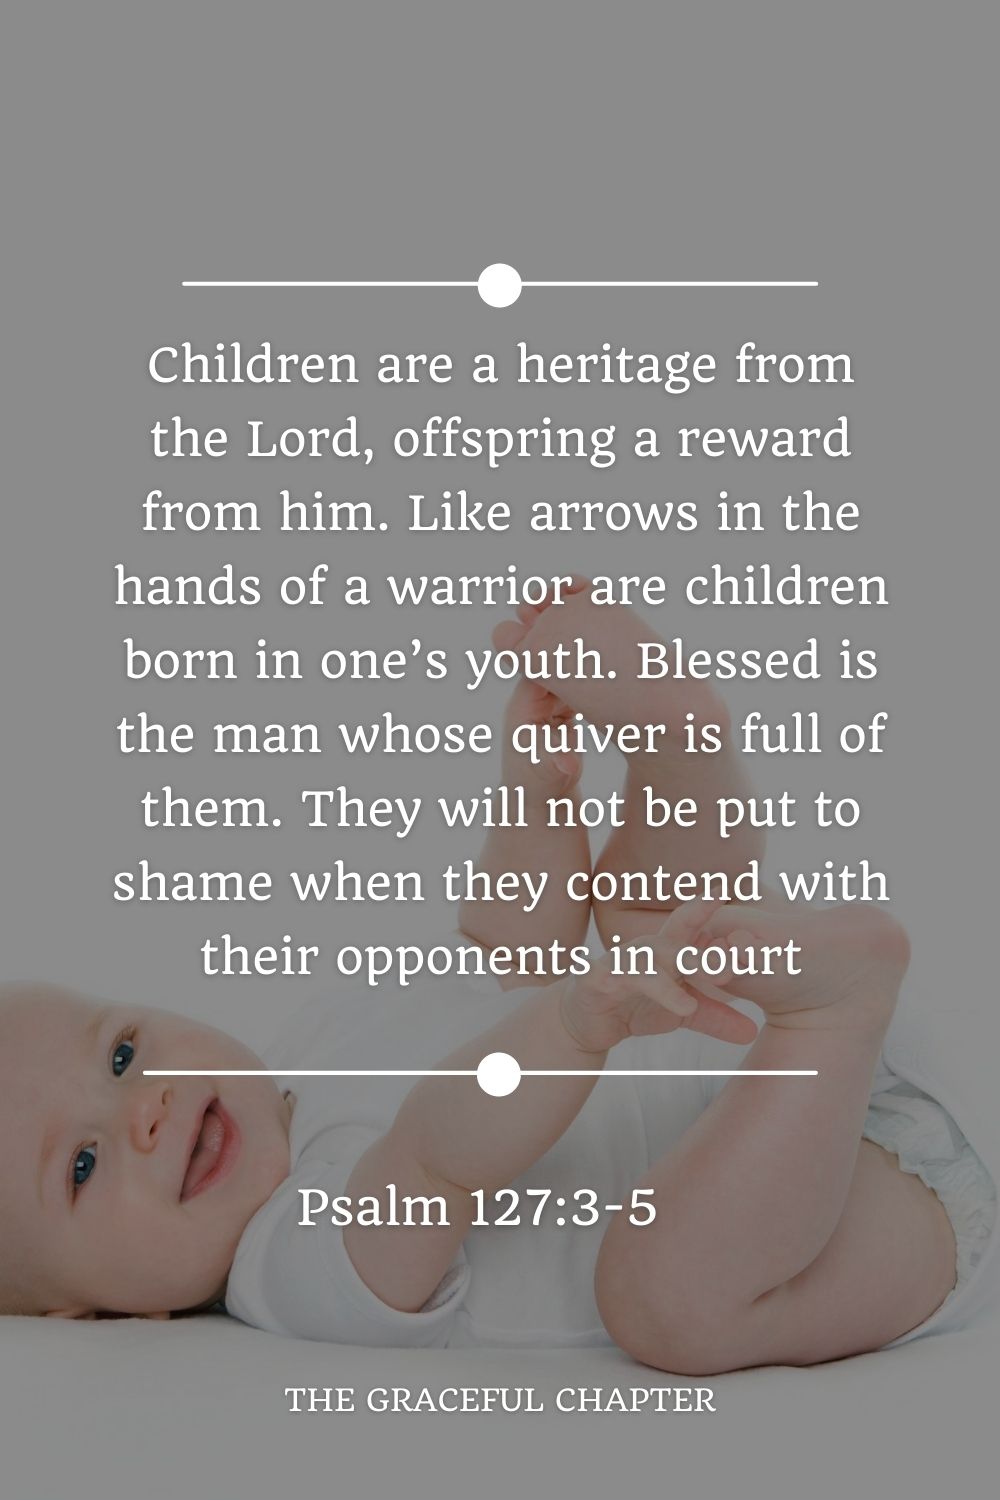 Children are a heritage from the Lord, offspring a reward from him. Like arrows in the hands of a warrior are children born in one’s youth. Blessed is the man whose quiver is full of them. They will not be put to shame when they contend with their opponents in court Psalm 127:3-5